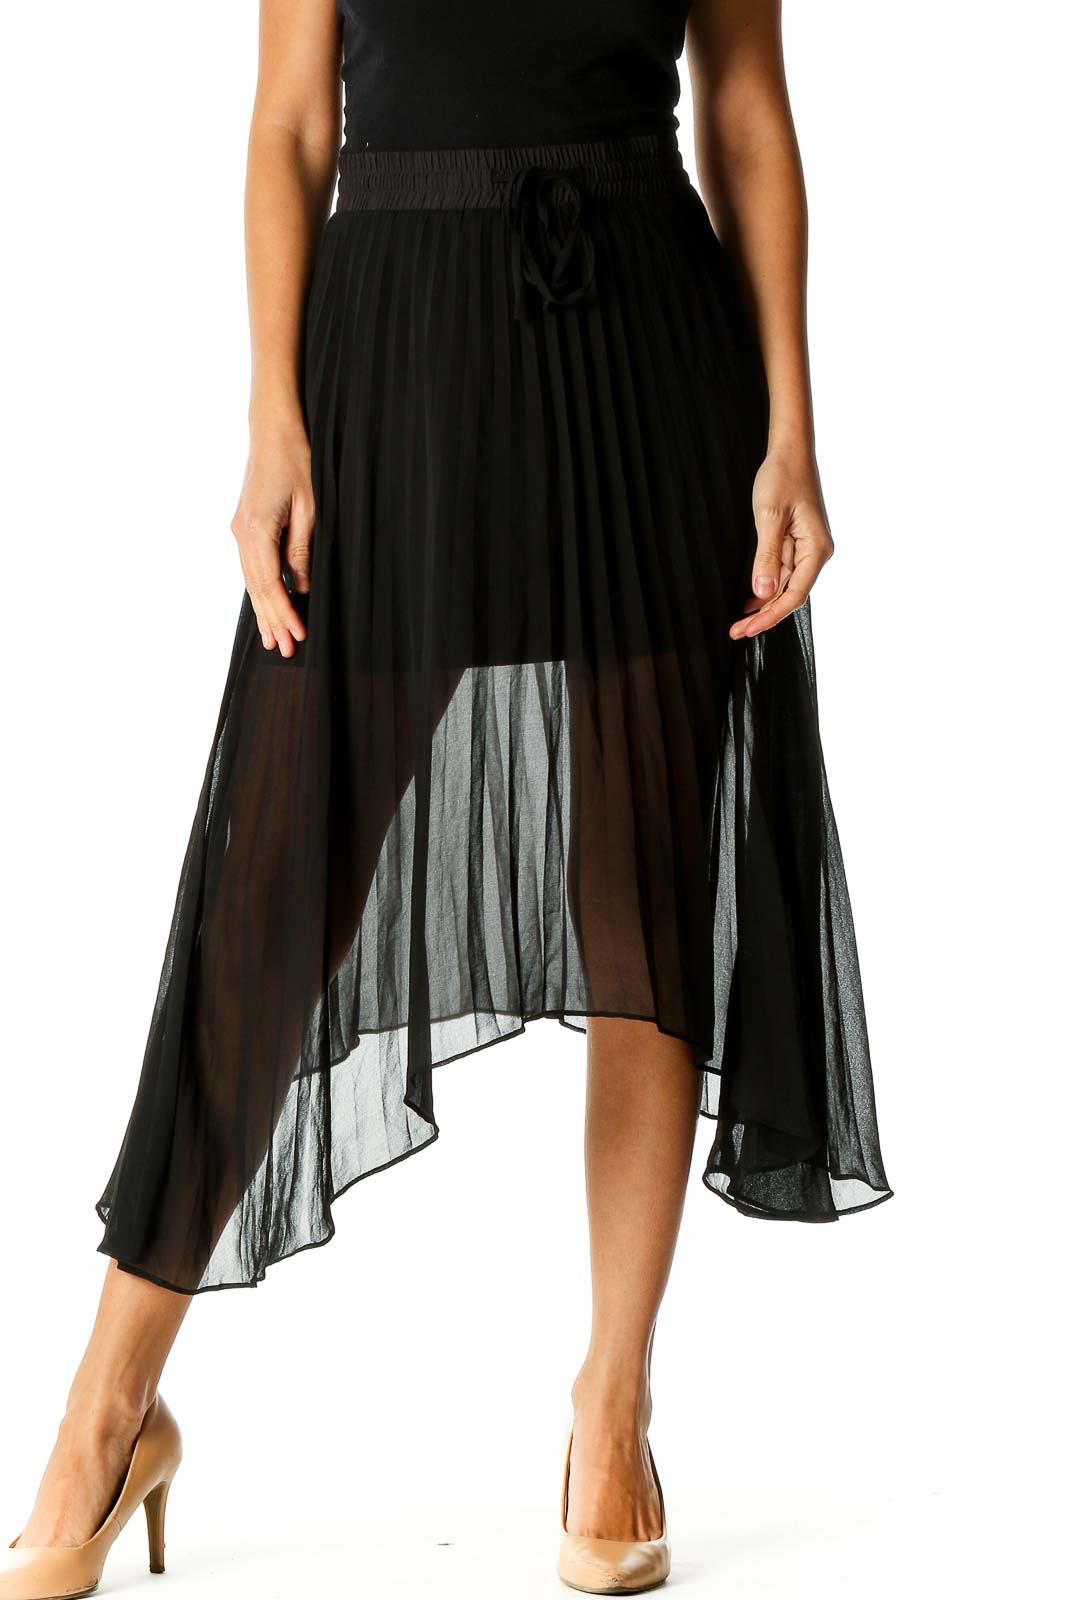 Black Solid Retro Flared Skirt Front